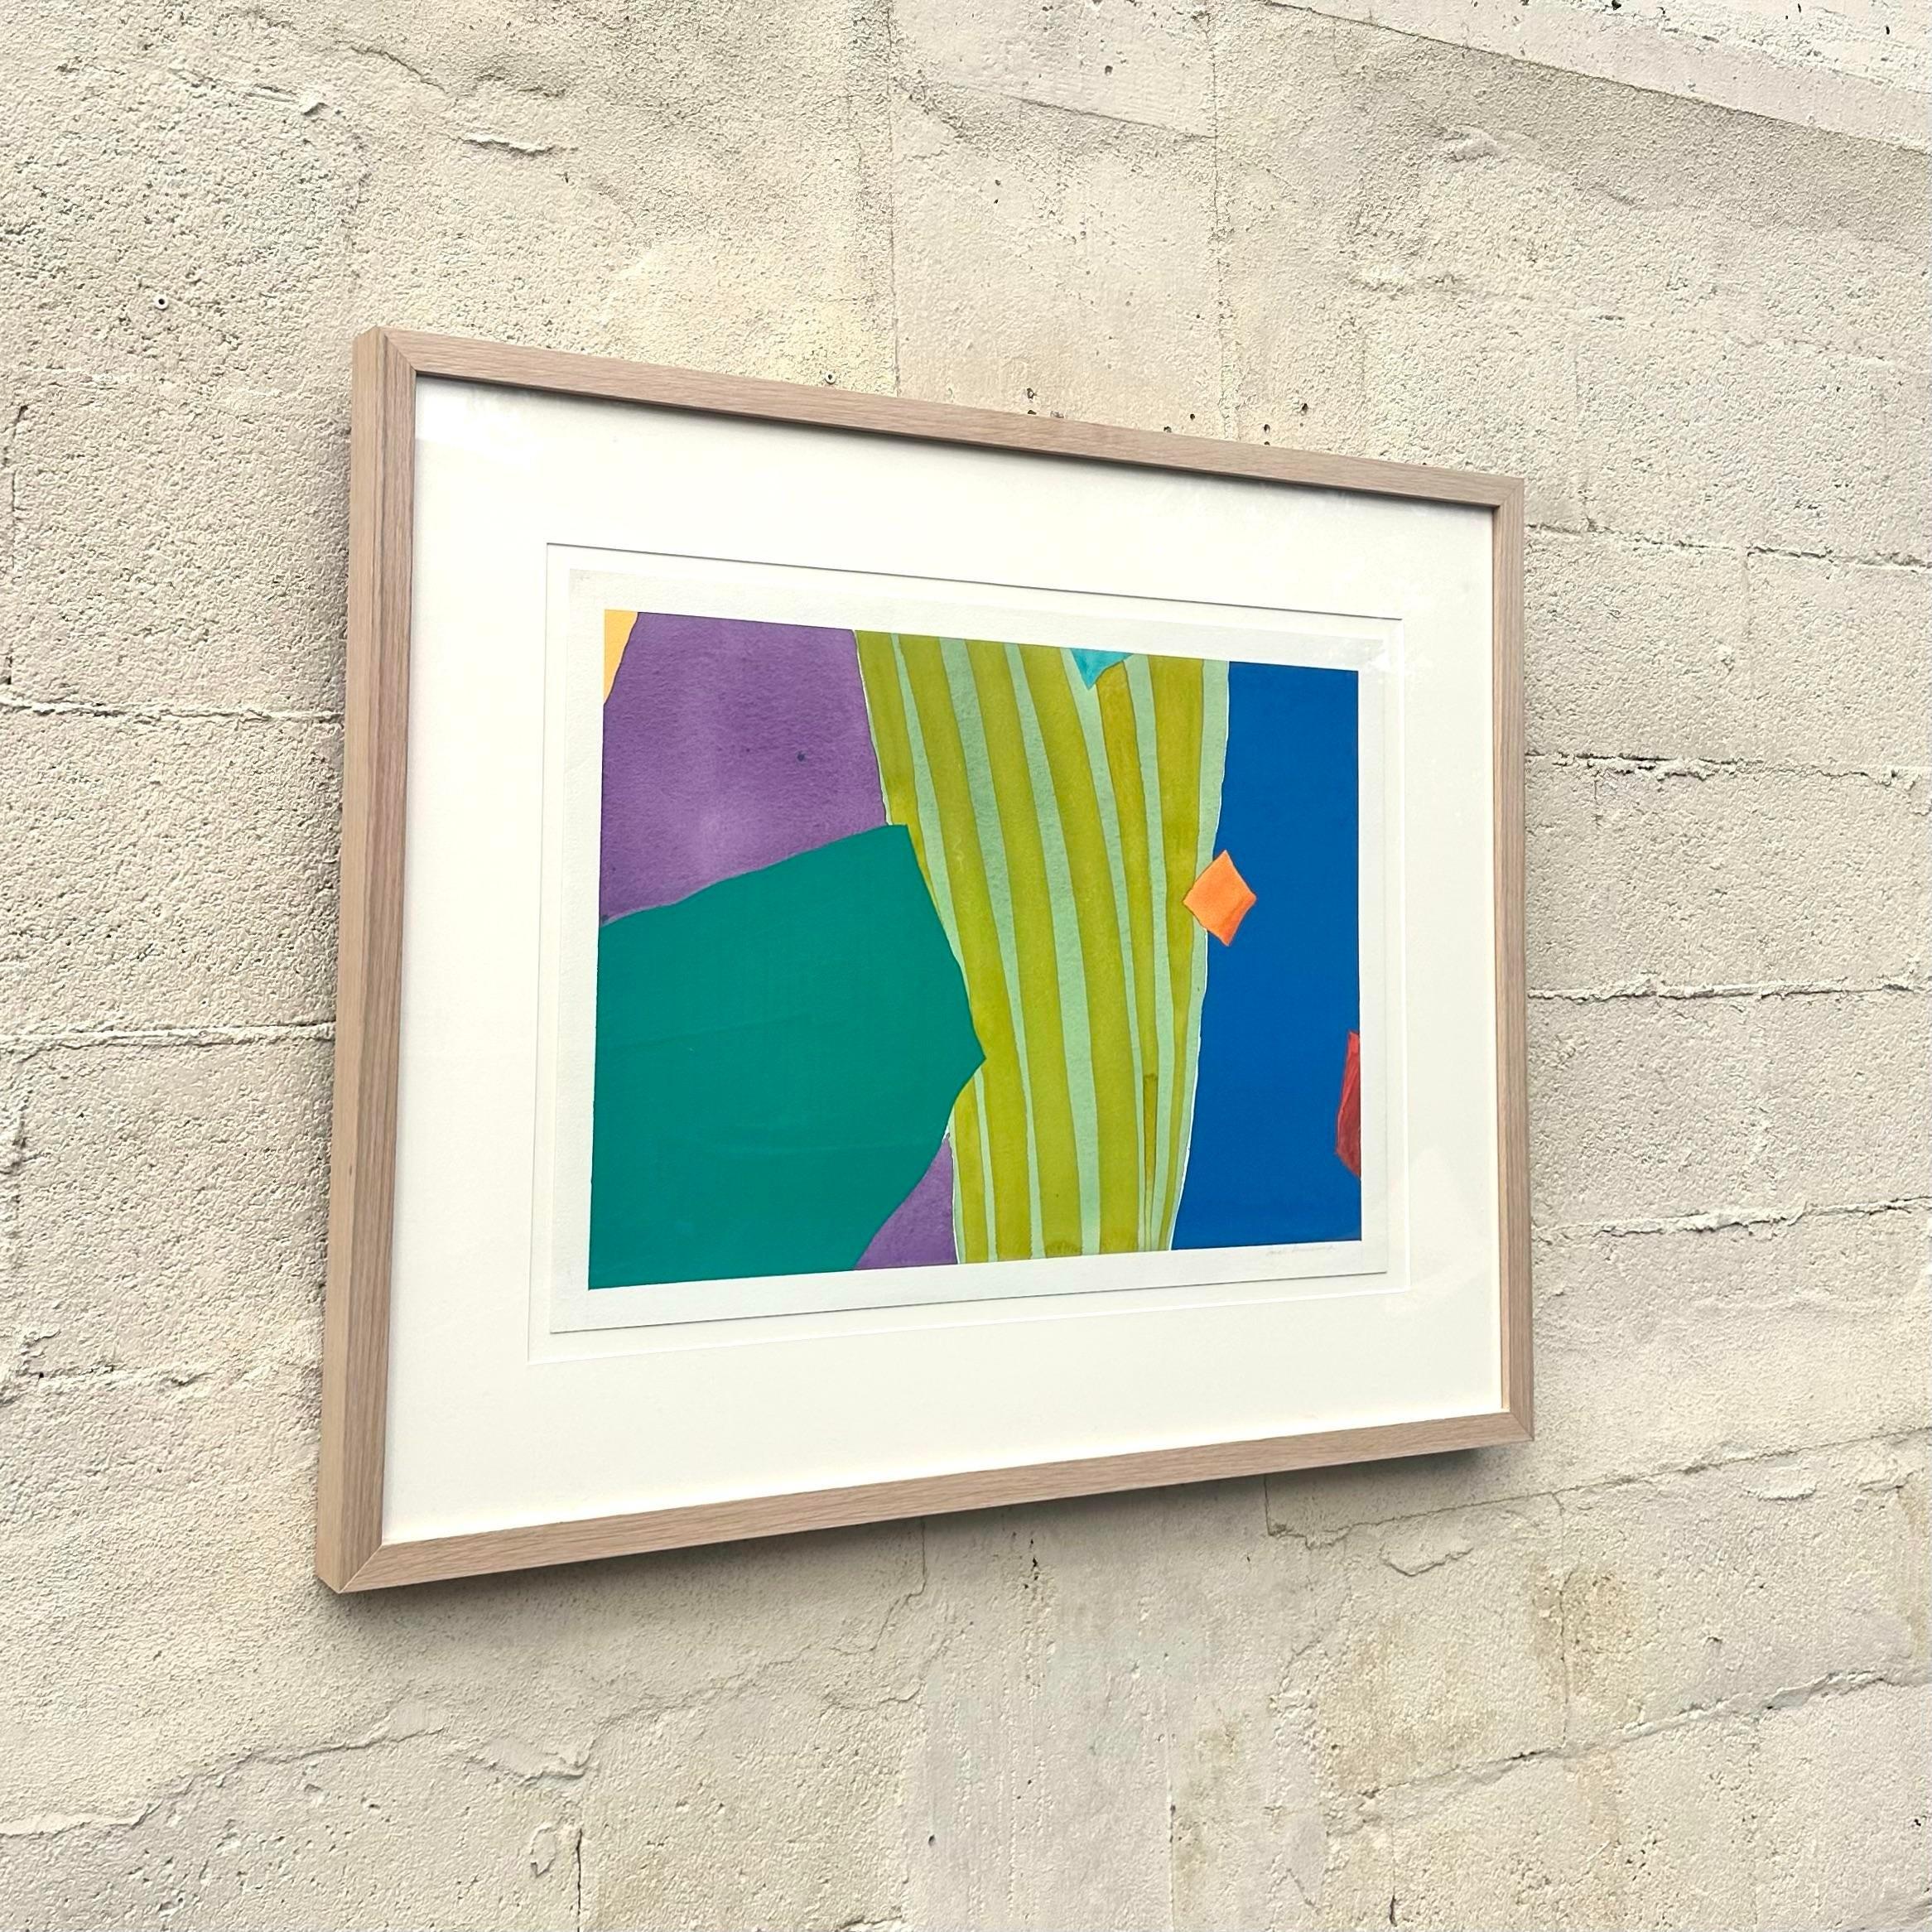 This original print combines contrasting colors and patterns to create a collage style piece. The primary colors and soft purple make this creation unique yet tastefully abstract. Acquired from a Palm Beach estate.